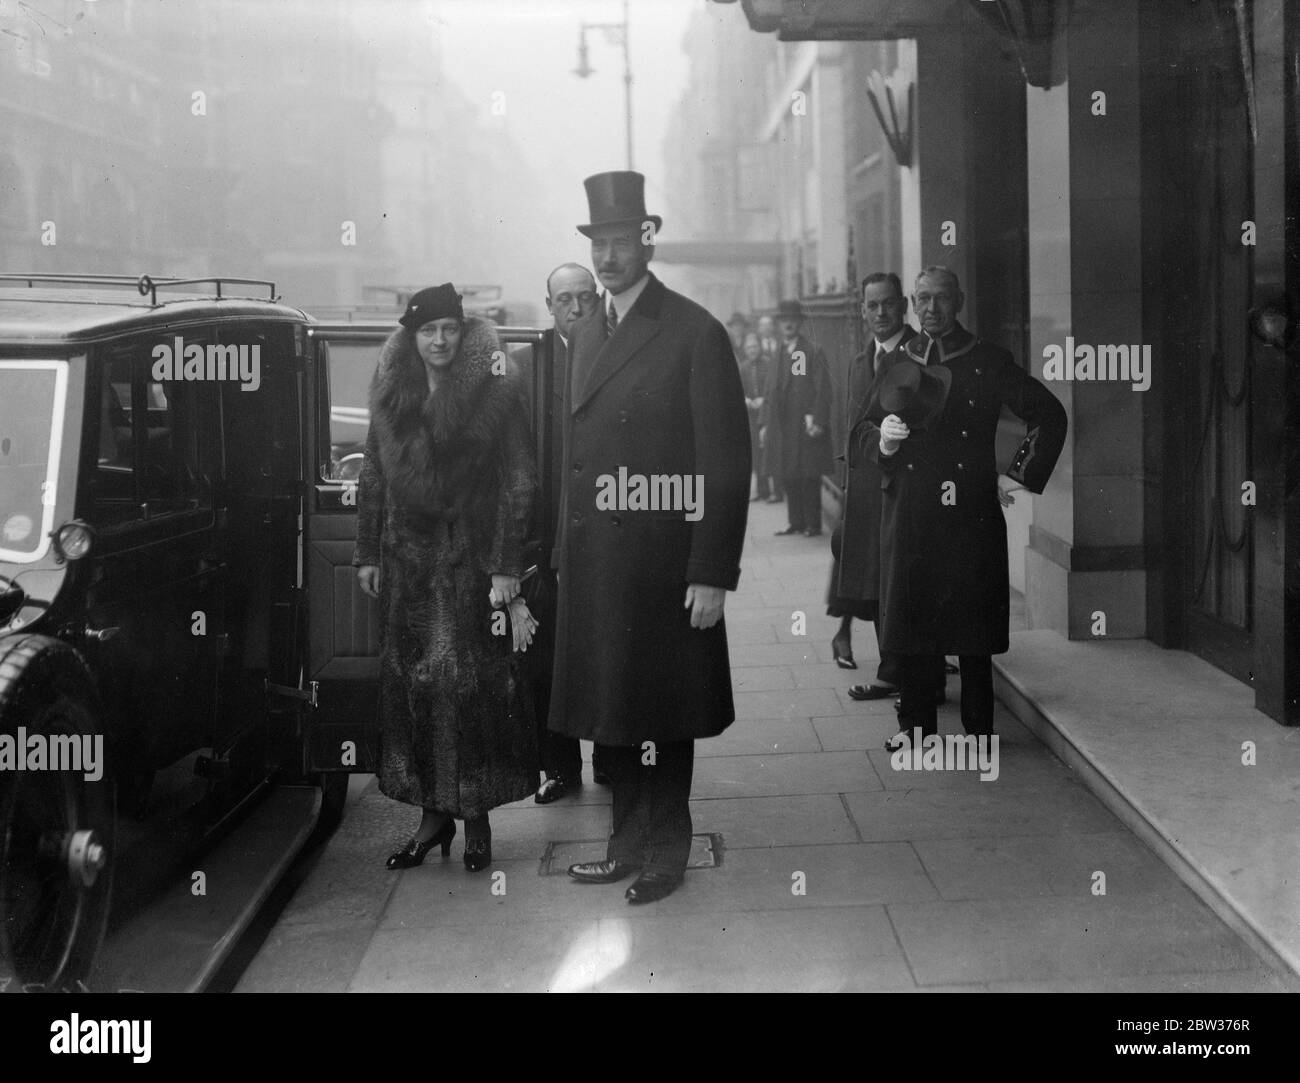 King and Queen of Denmark on shopping visit to London . The King and Queen of Denmark who arrived last night are spending a week in London for Christmas shopping . Photo shows ; The King and Queen of Denmark leaving Claridges Hotel . 11 December 1933 Stock Photo